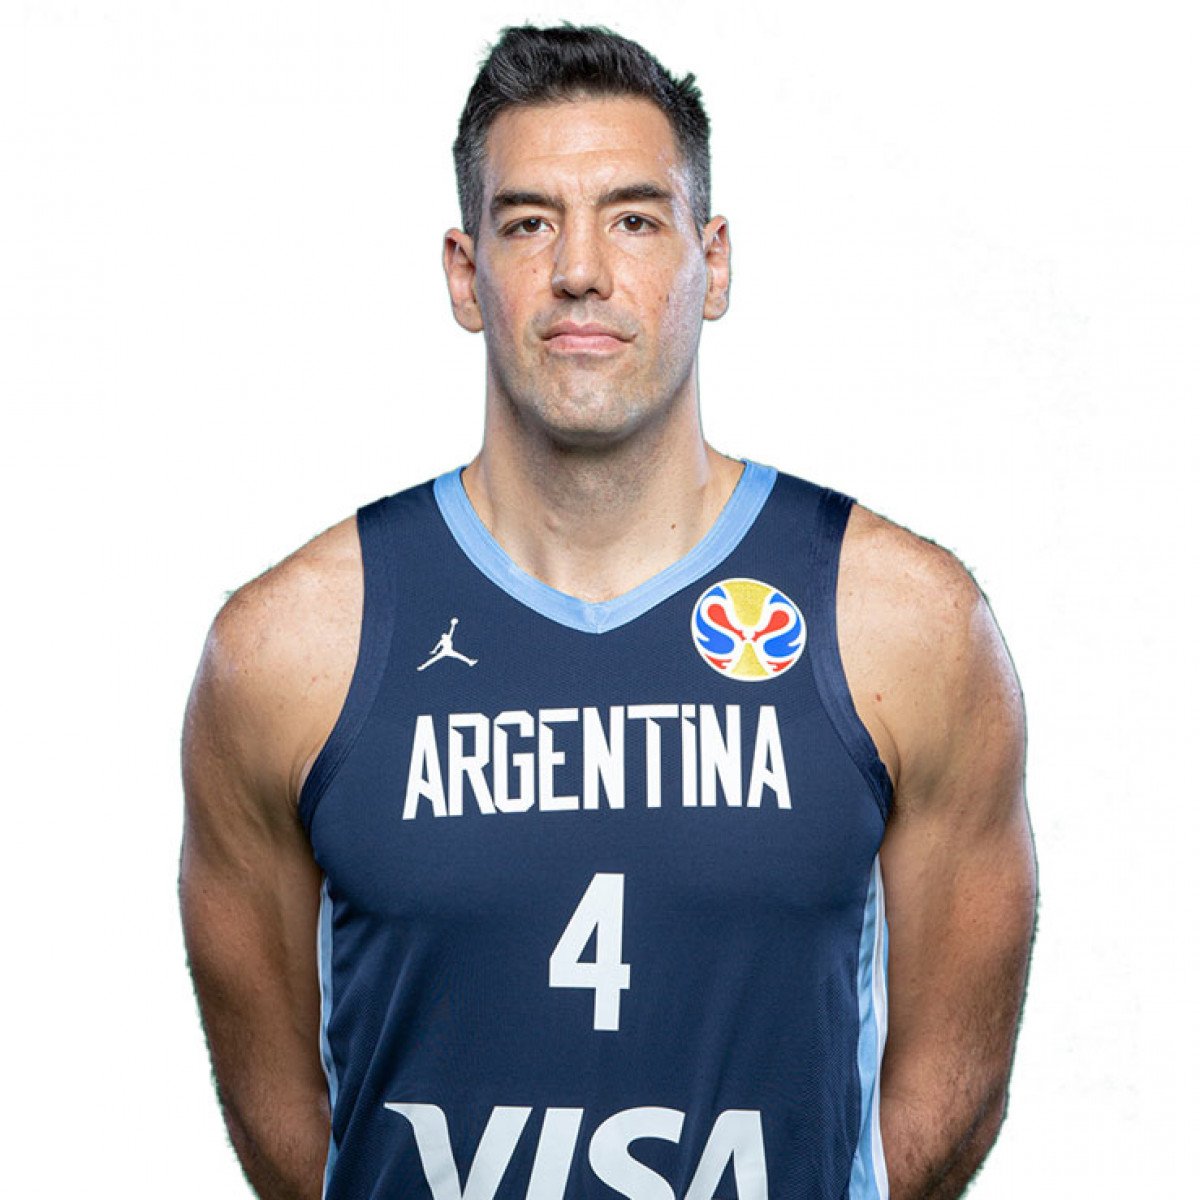 Sean Yoo On Twitter Yes I Am An American But I Will Be Rooting For Handsome Luis Scola And Only Handsome Luis Scola Today